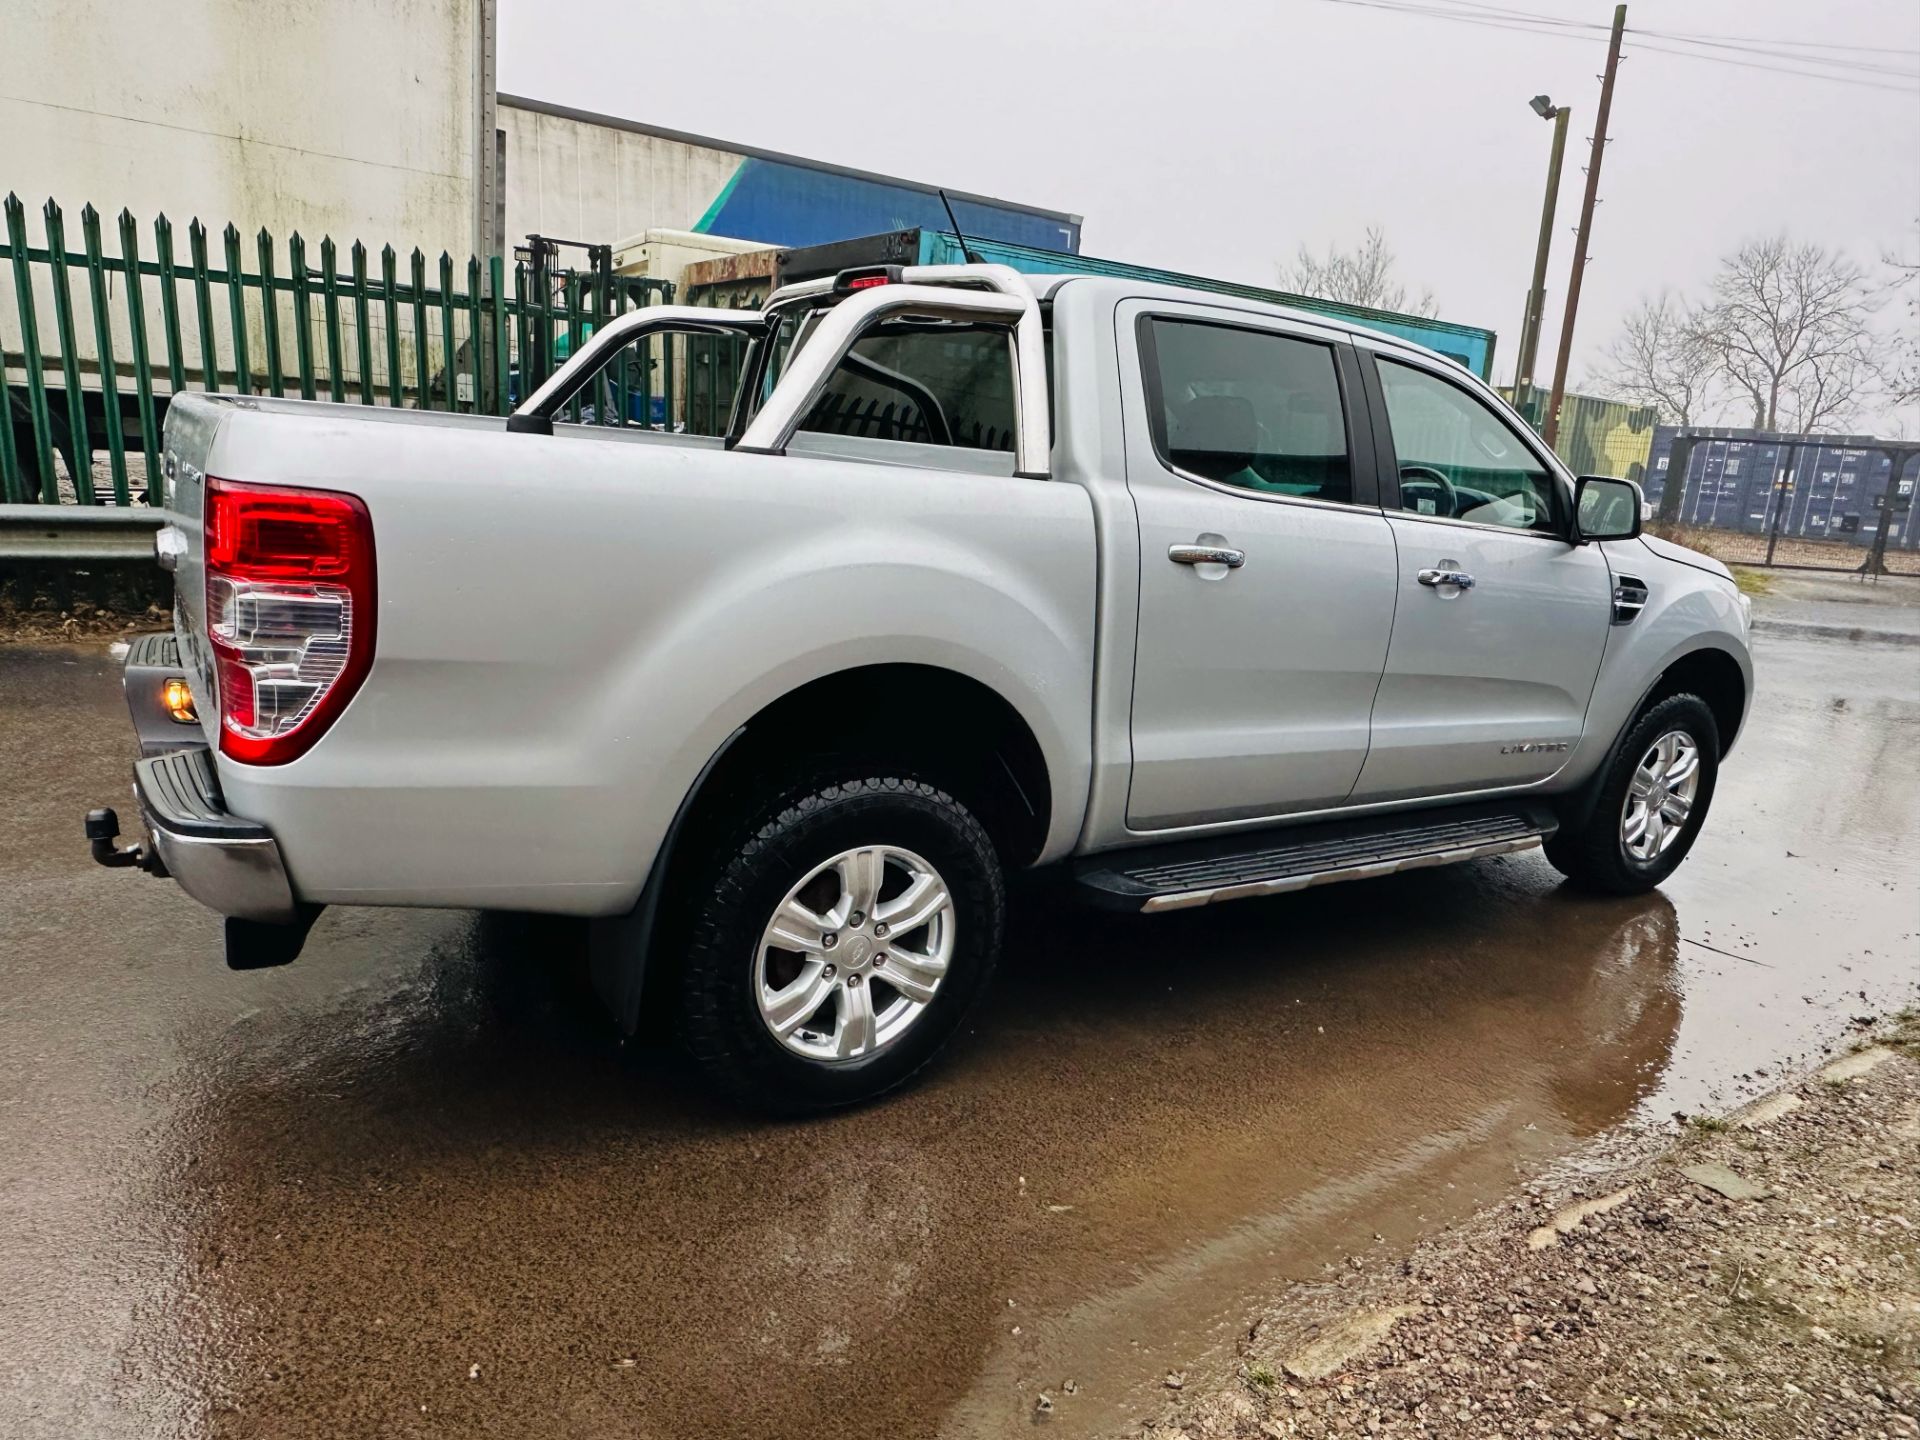 Ford Ranger 2.0 TDCI LIMITED 170BHP Auto SS (2021 Model) Huge Spec -Sat Nav Leather 35k Miles Only - Image 13 of 44